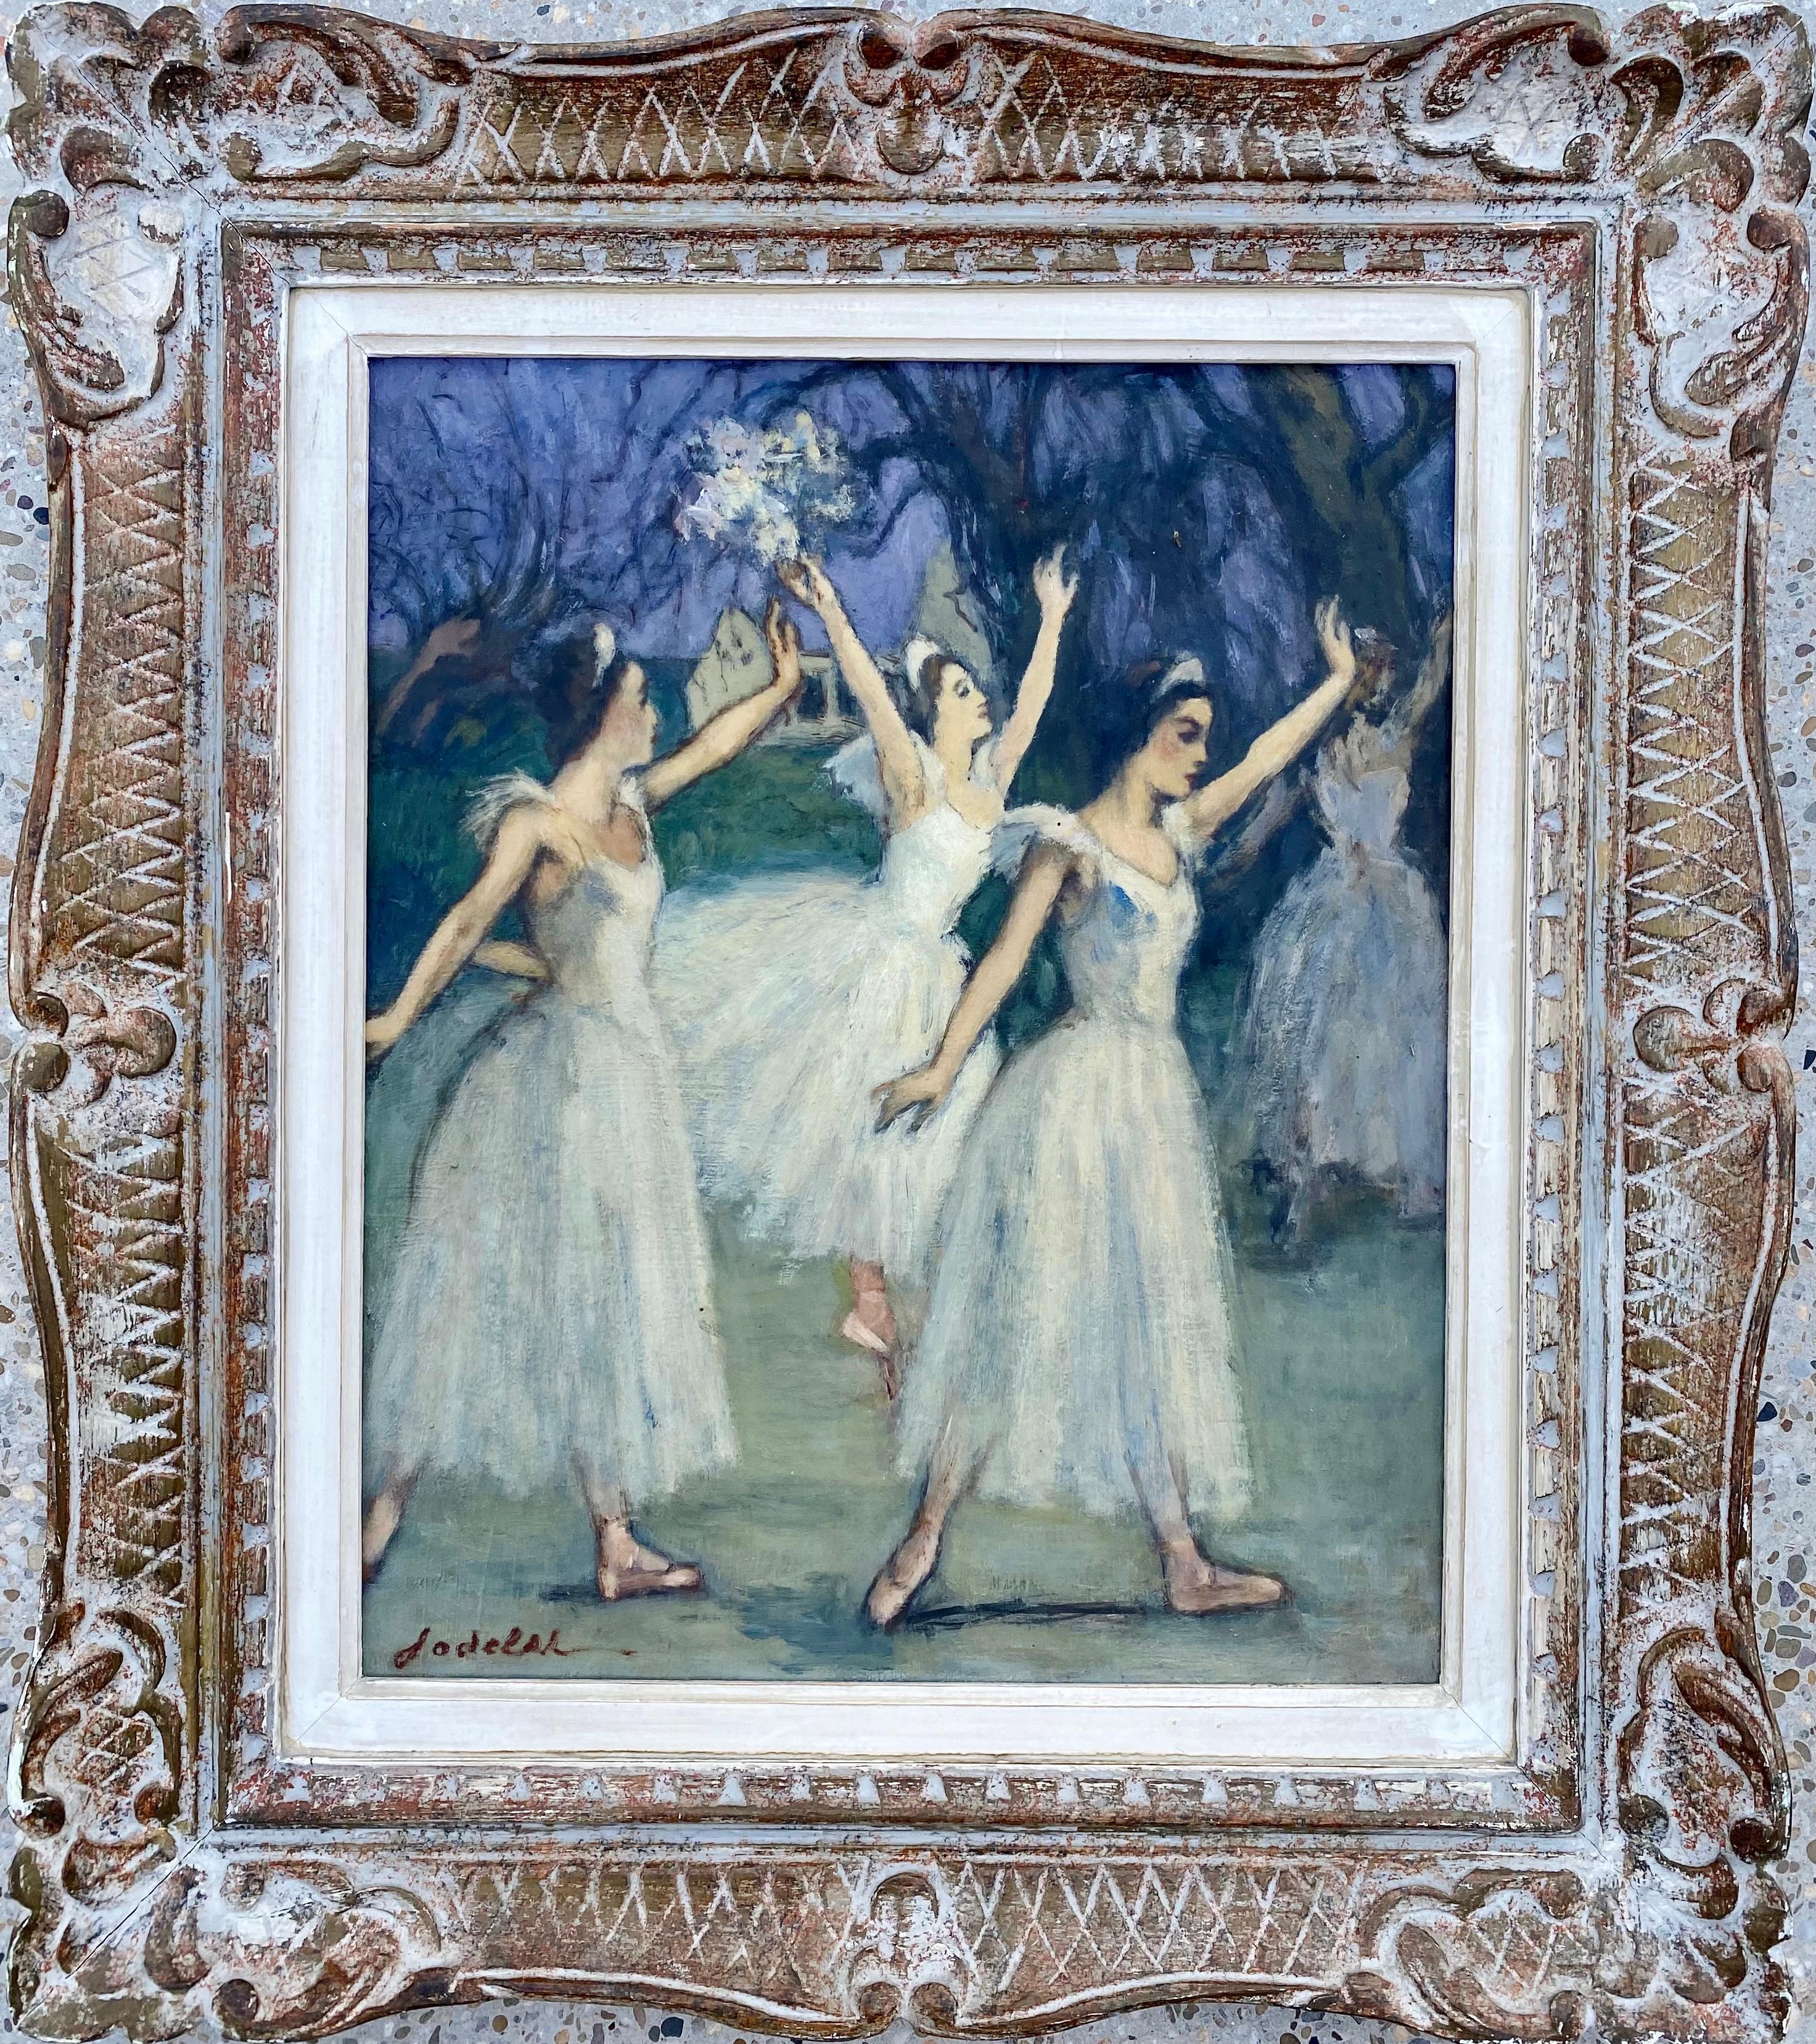 Charles Emmanuel Jodelet Interior Painting - French 19th century style impressionist painting - Ballet - Dance Dancers Degas